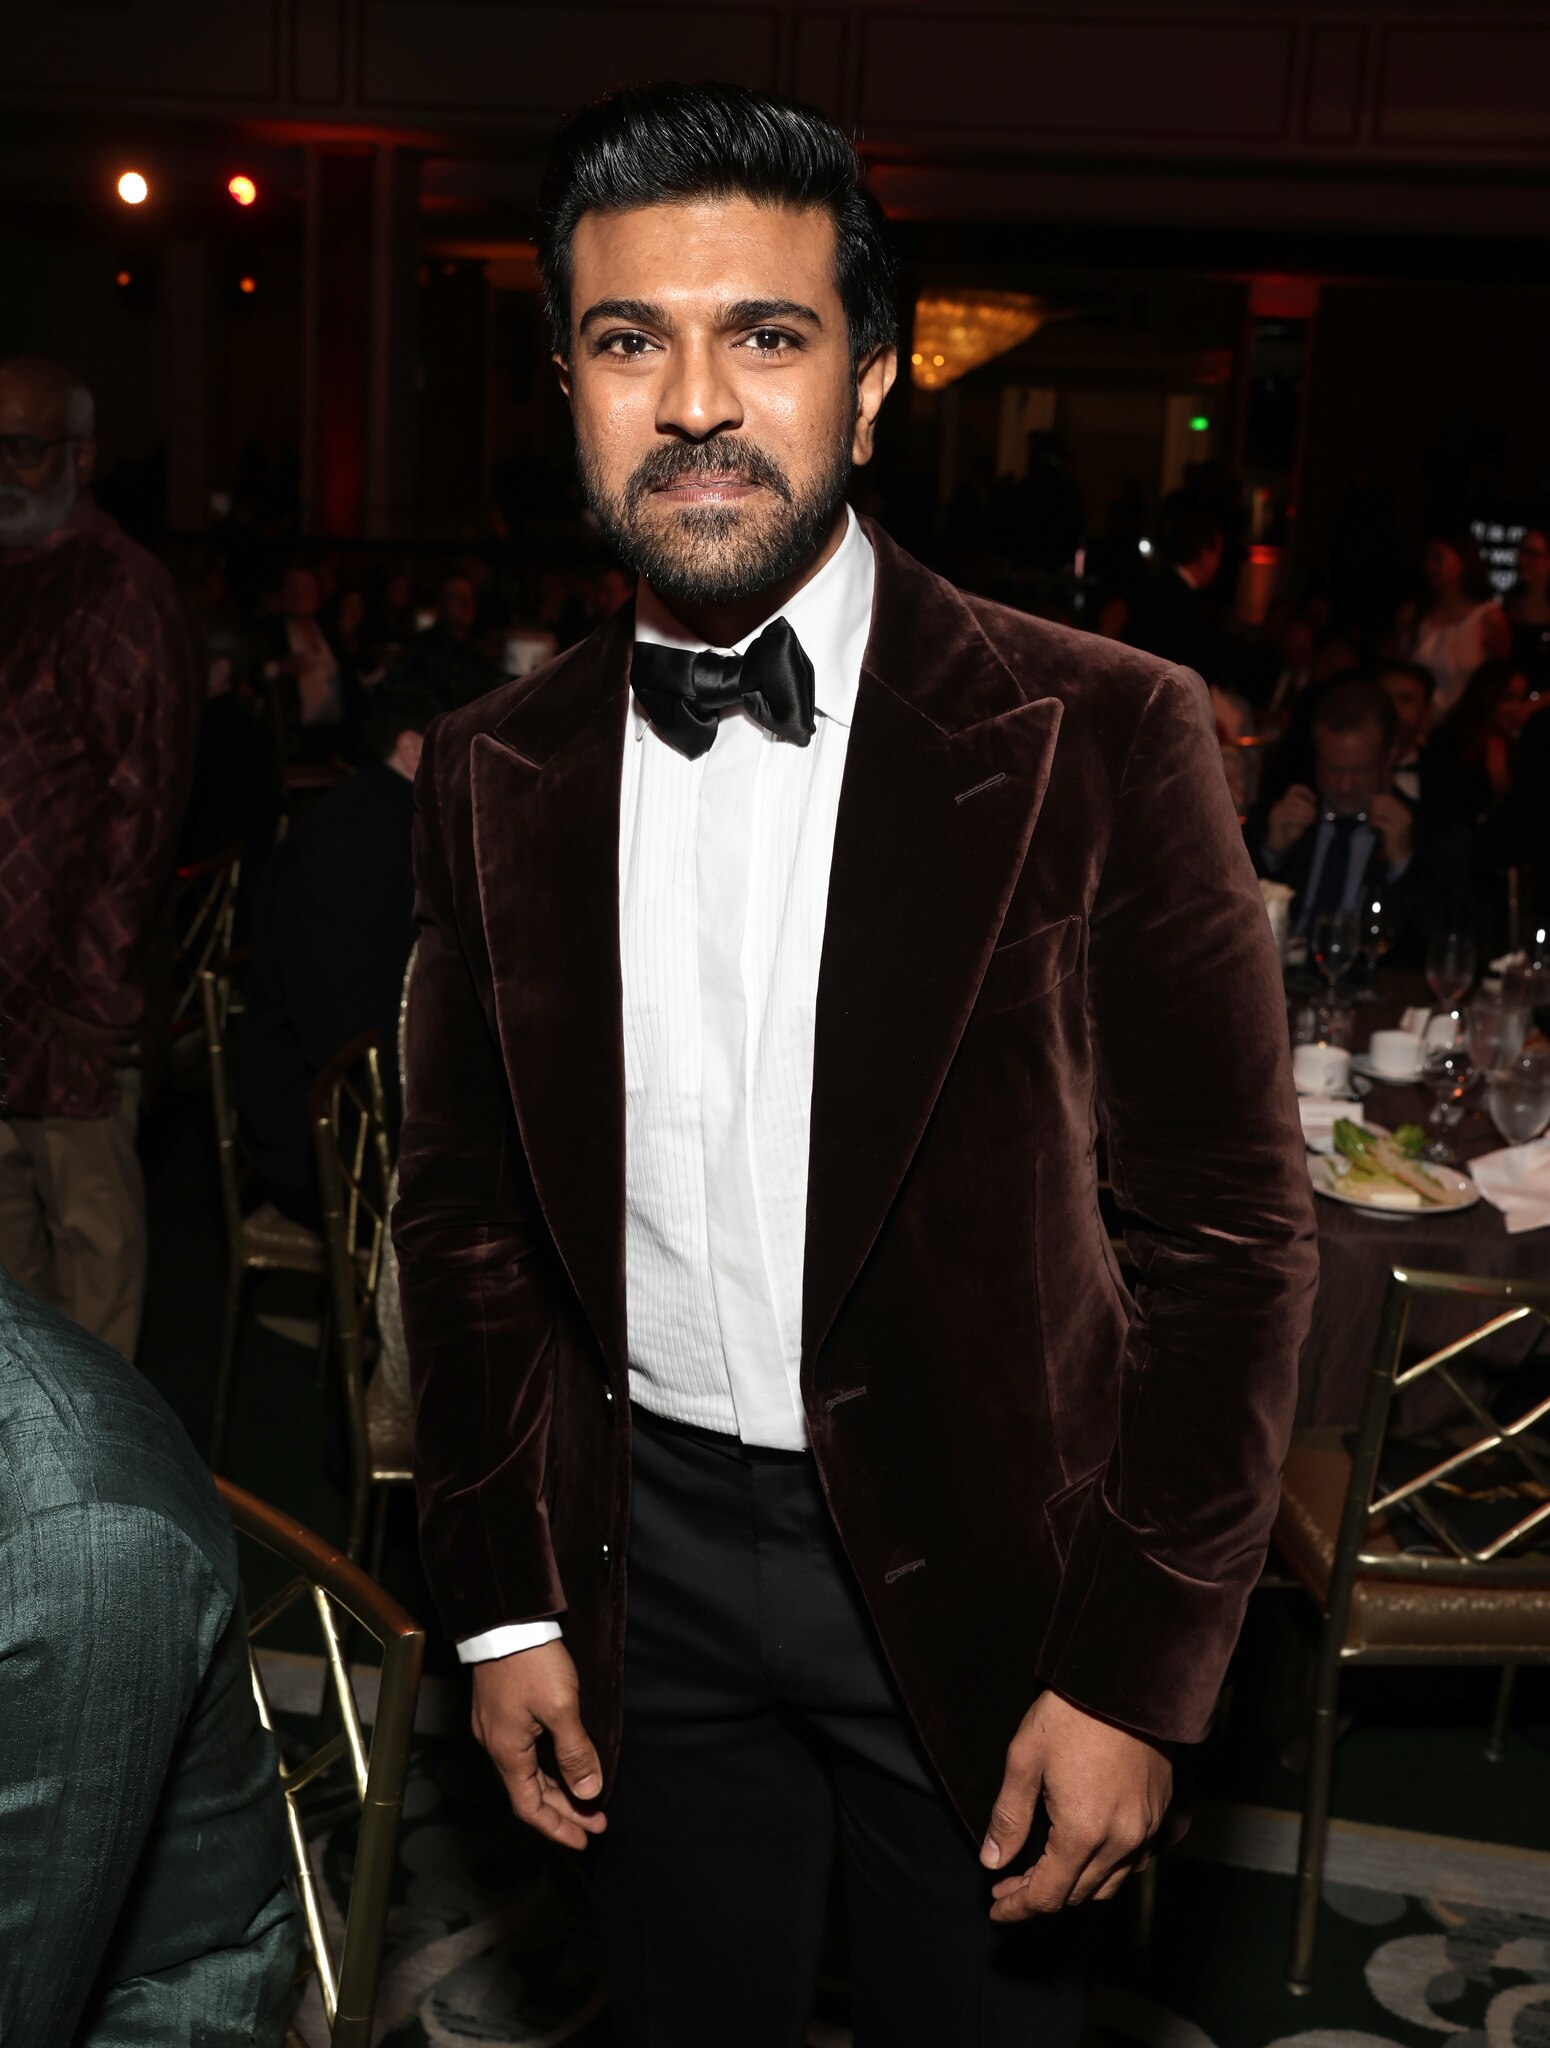 Ram Charan. Photo credit: Shutterstock for the Hollywood Critics Association